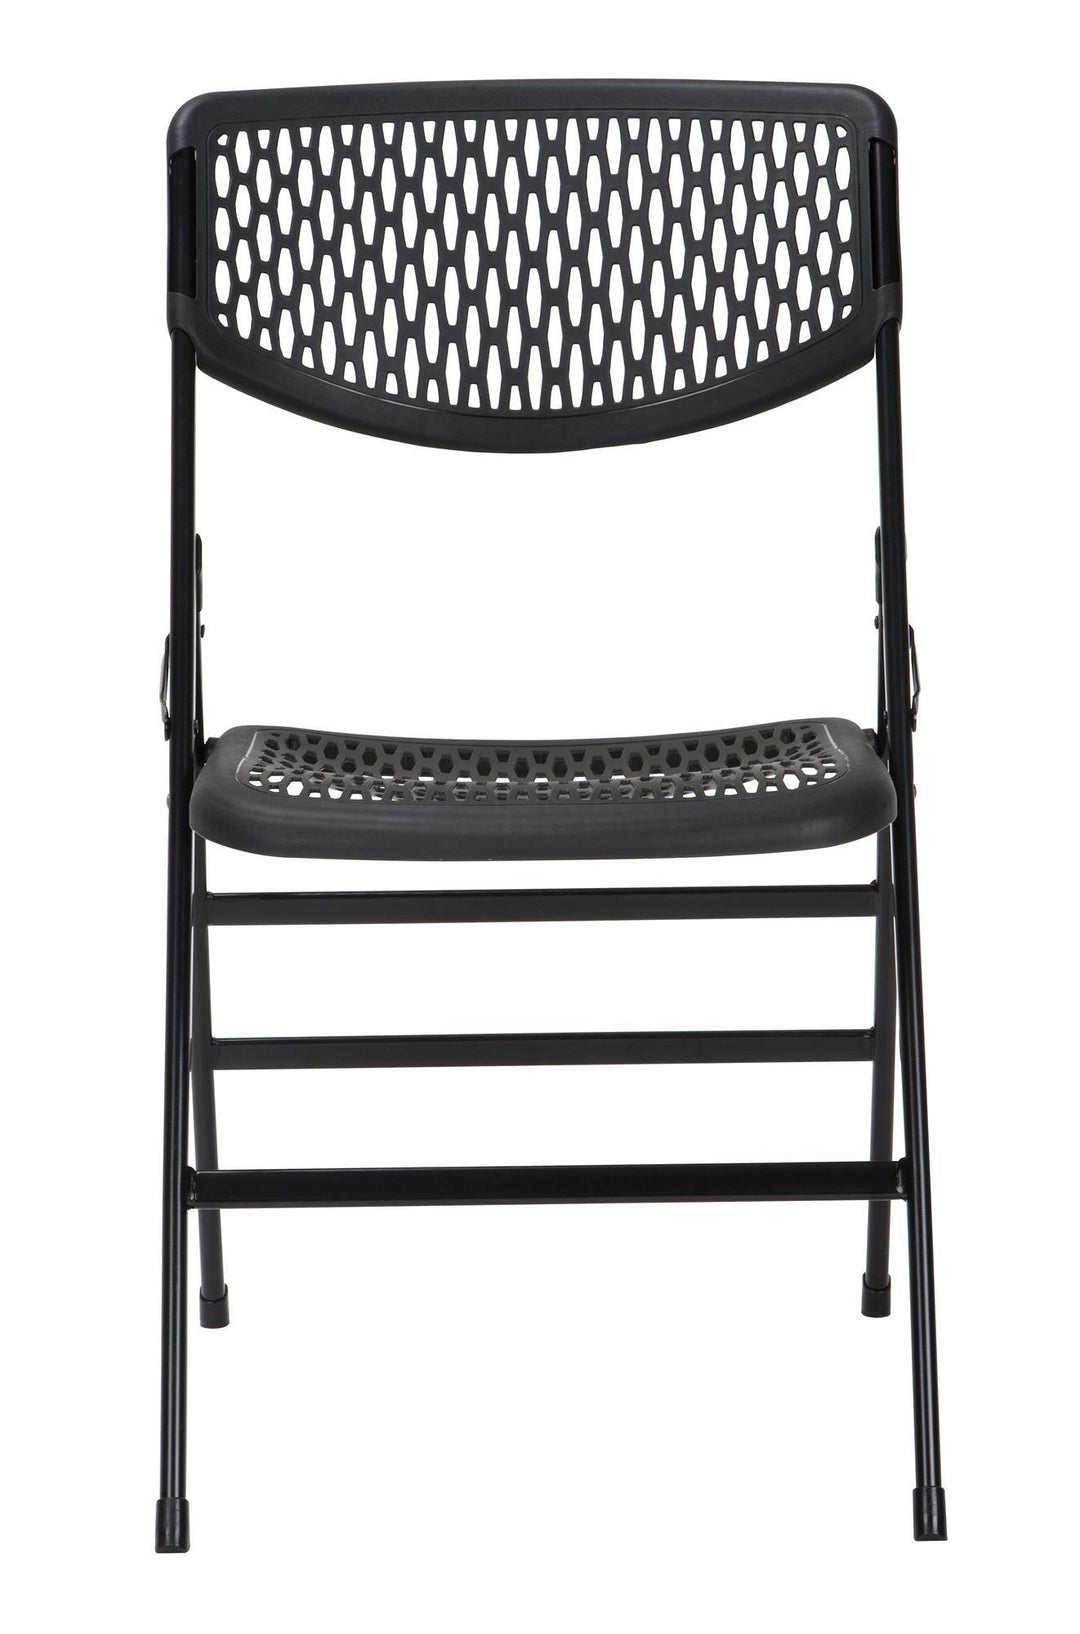 Set of 4 Folding Chair Ultra Comfort Commercial -  Black 